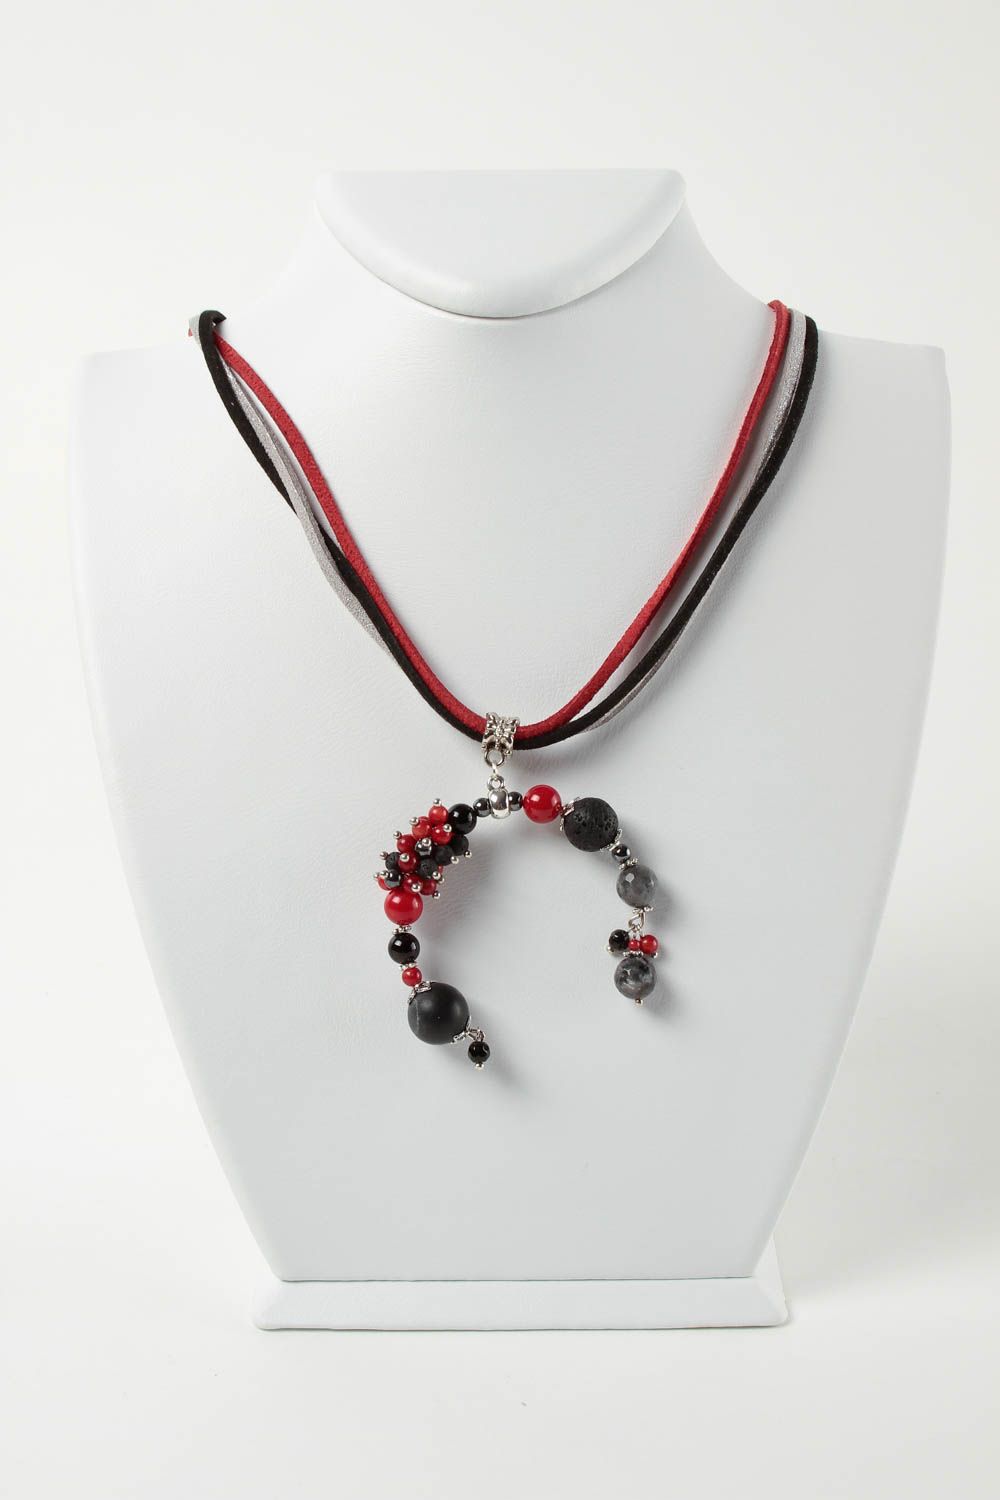 Handmade agate necklace hematite necklace jewelry with natural stones for women photo 1